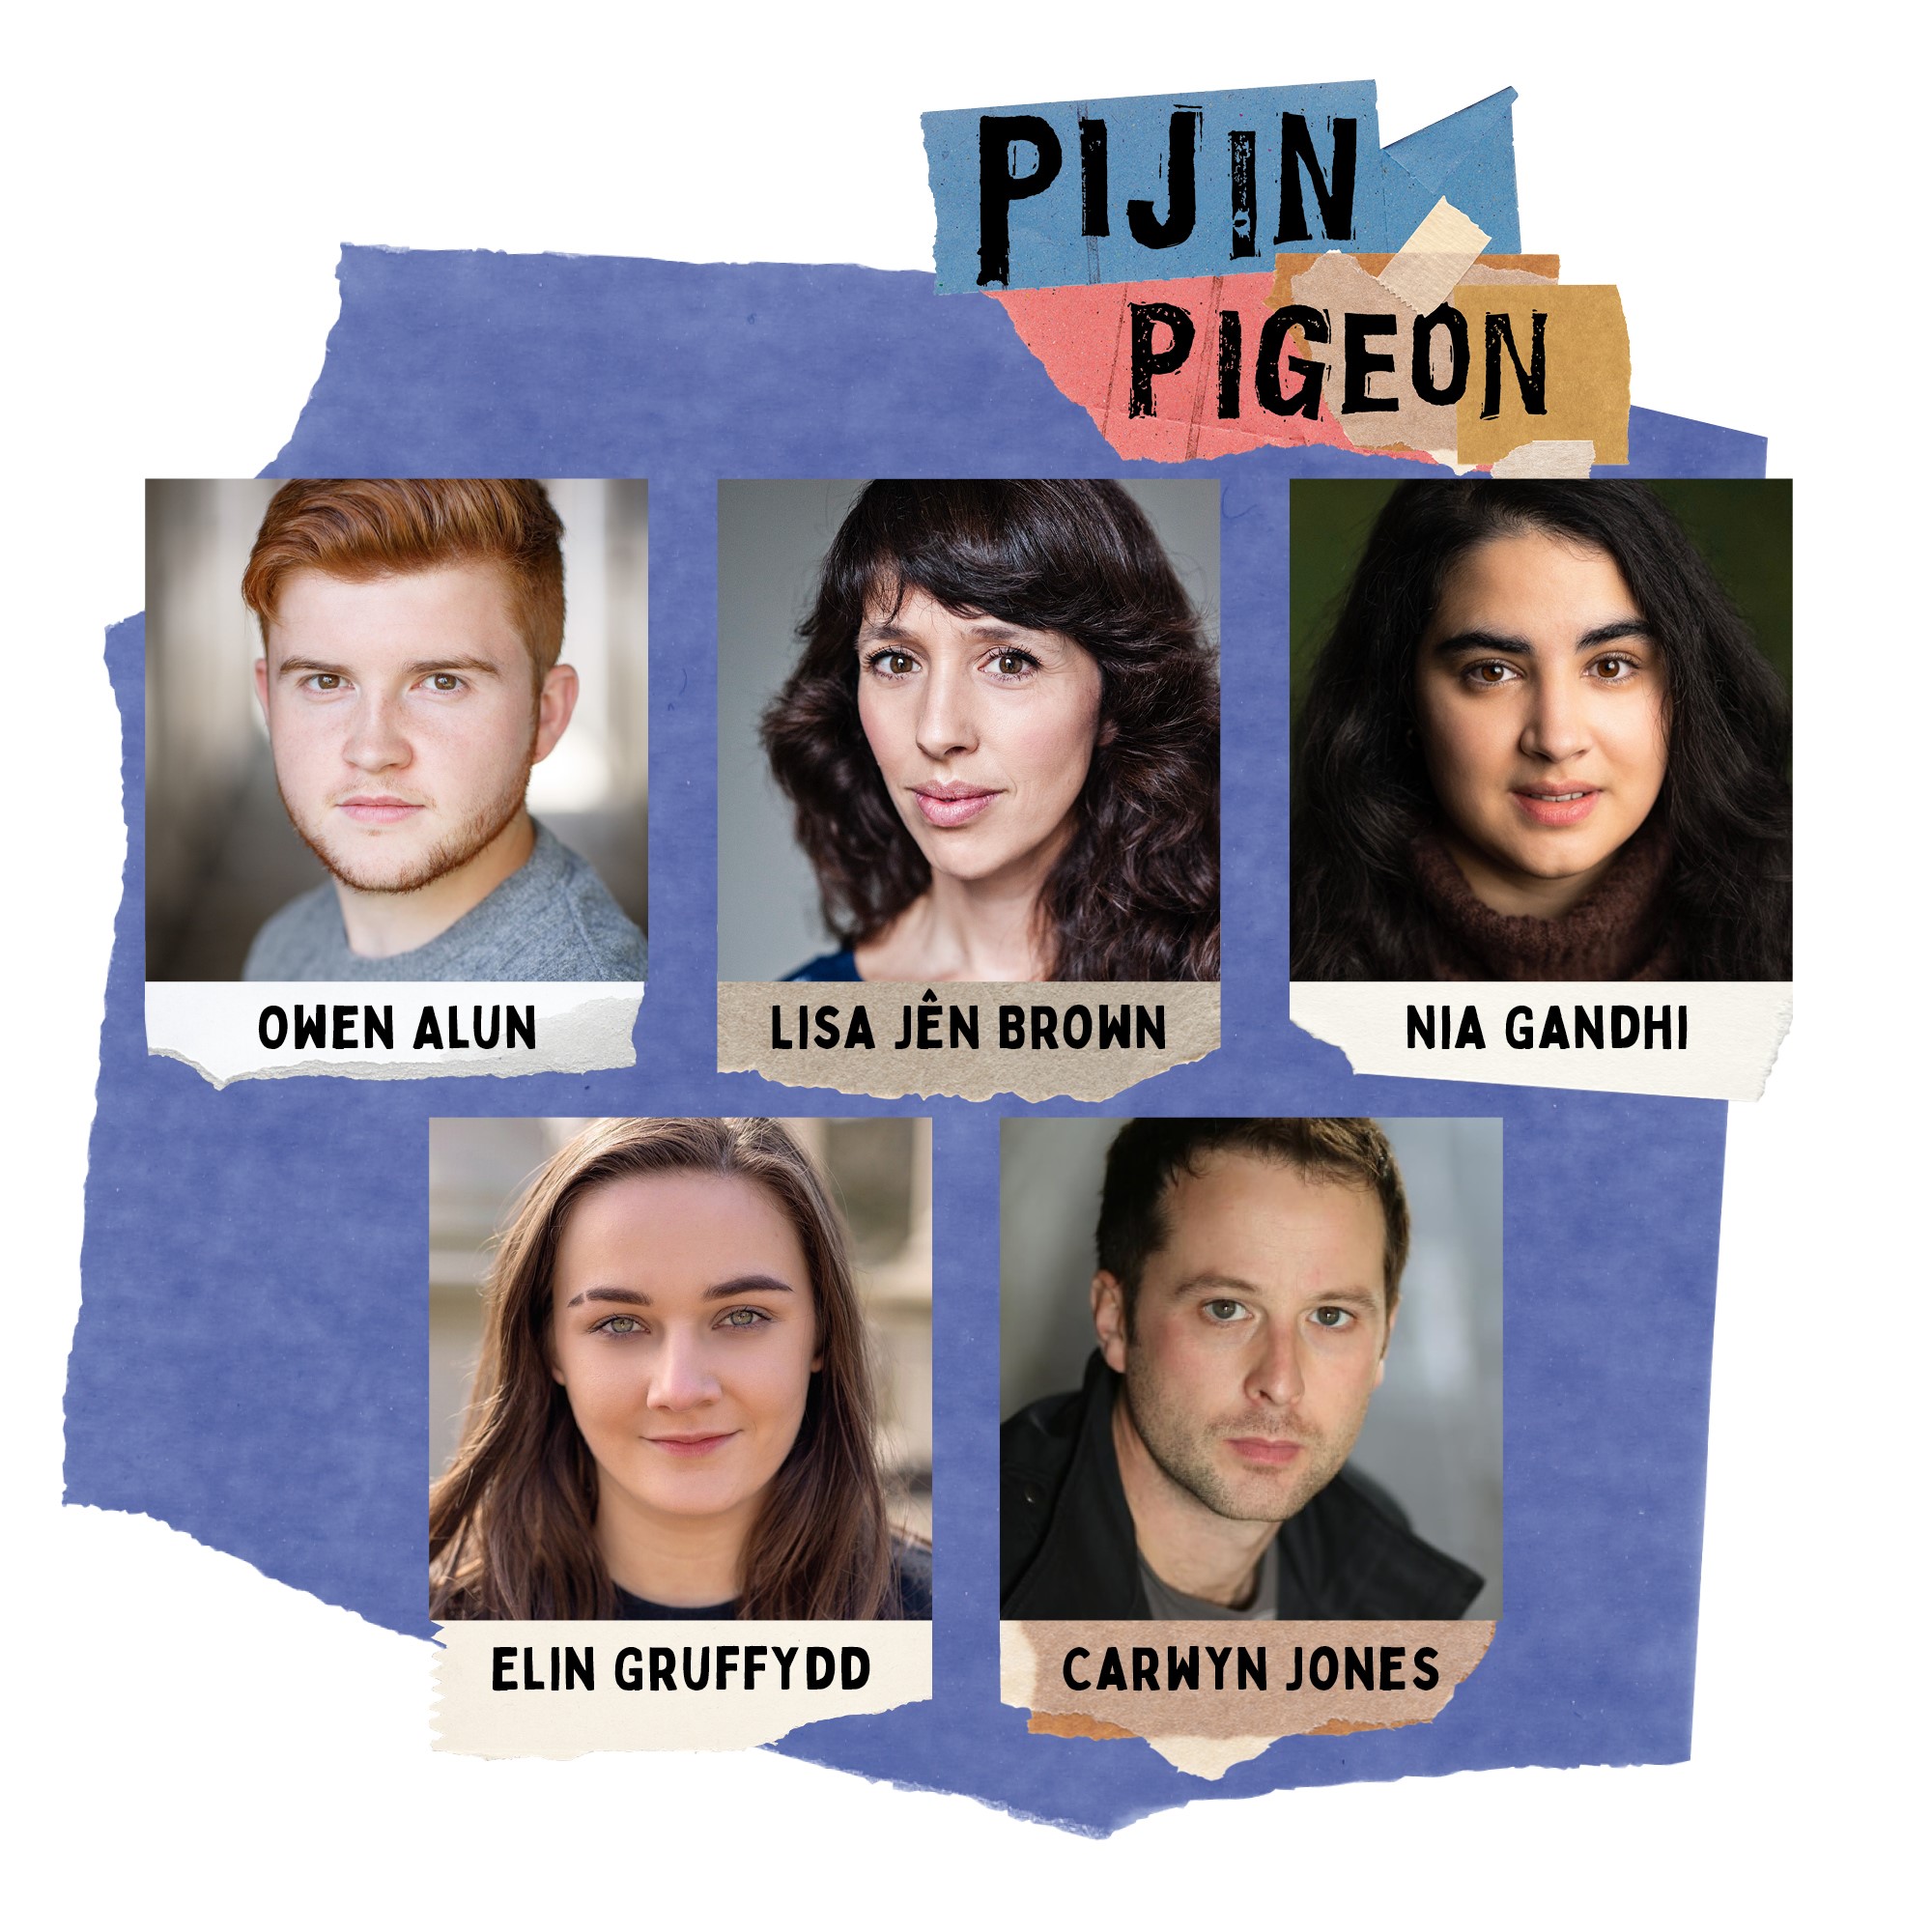 Image introducing cast of Pigeon. 5 headshots in squares, two men and three women. Names underneath from top to bottom read Owen Alun, Lisa Jen Brown, Nia Gandhi, Elin Gruffydd and Carwyn Jones